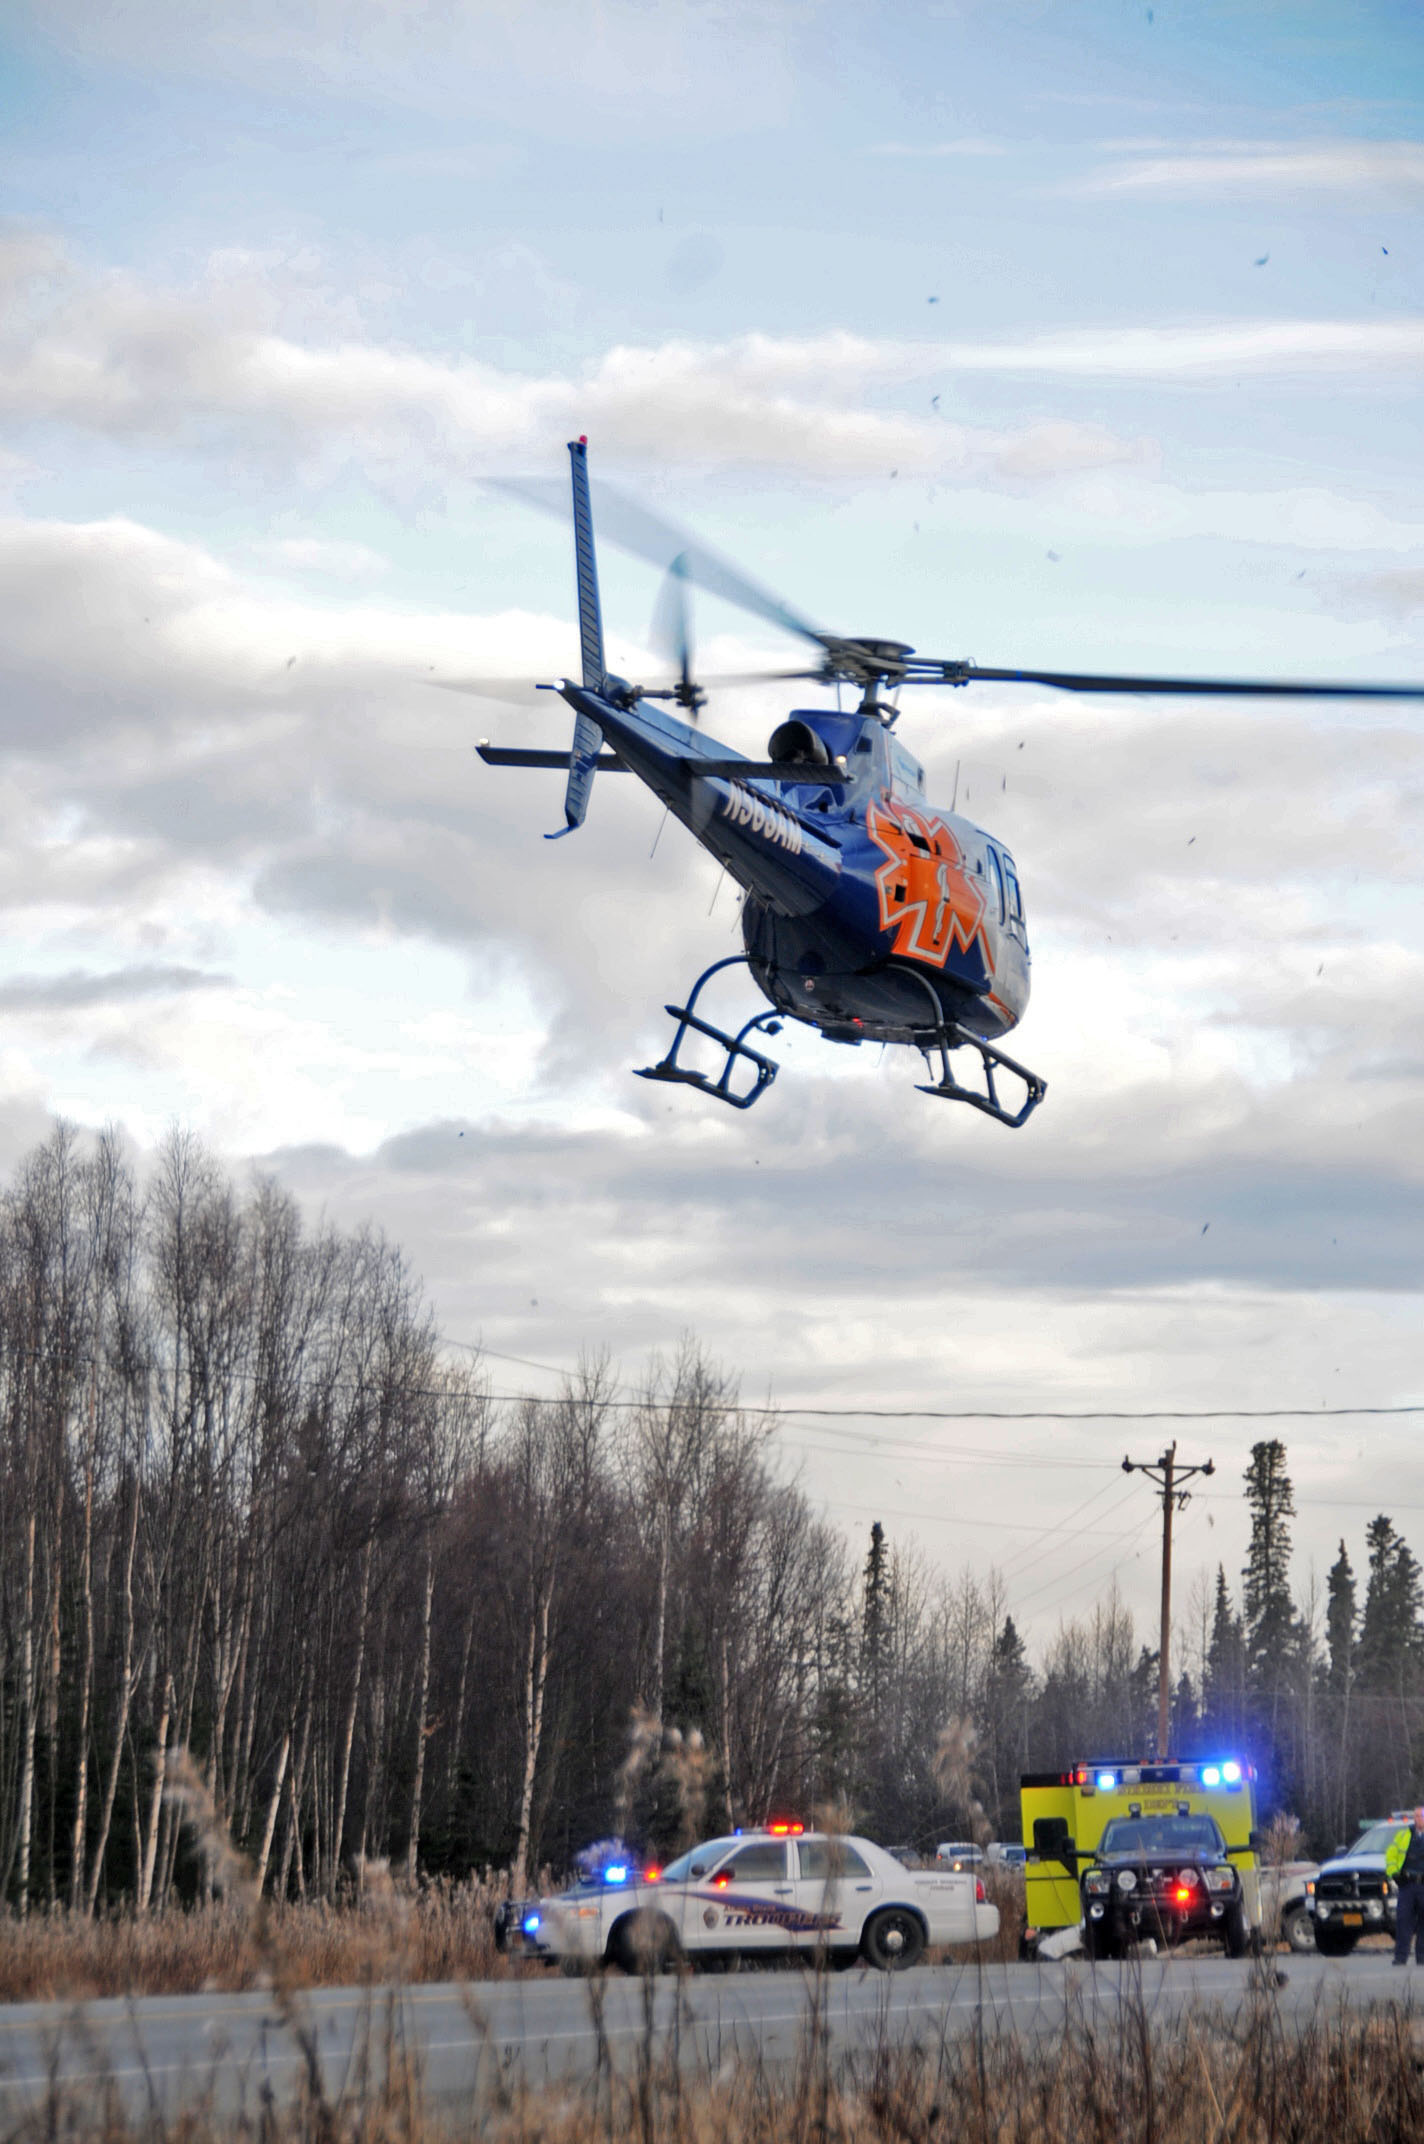 A LifeMed Alaska helicopter landed on the Kenai Spur Highway to evacuate one of the drivers after a motor vehicle accident Friday morning.